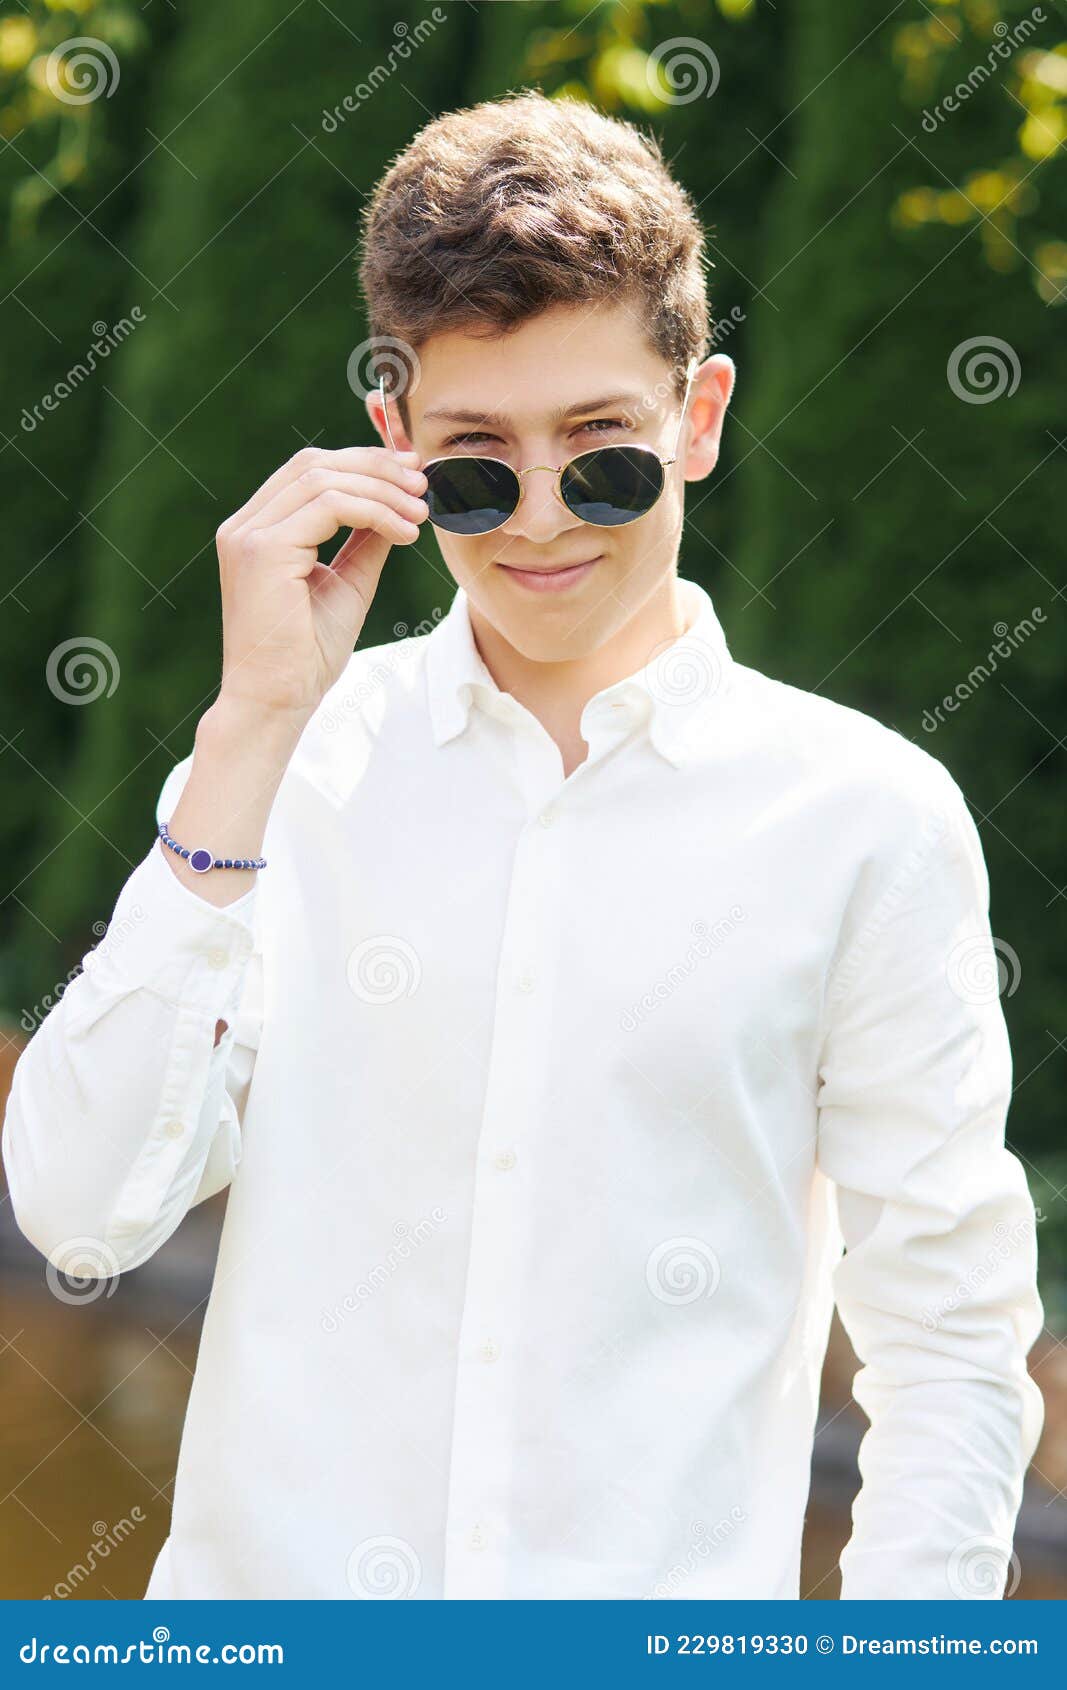 https://thumbs.dreamstime.com/z/stylish-teenager-years-old-sunglasses-outdoors-background-nature-adolescence-229819330.jpg